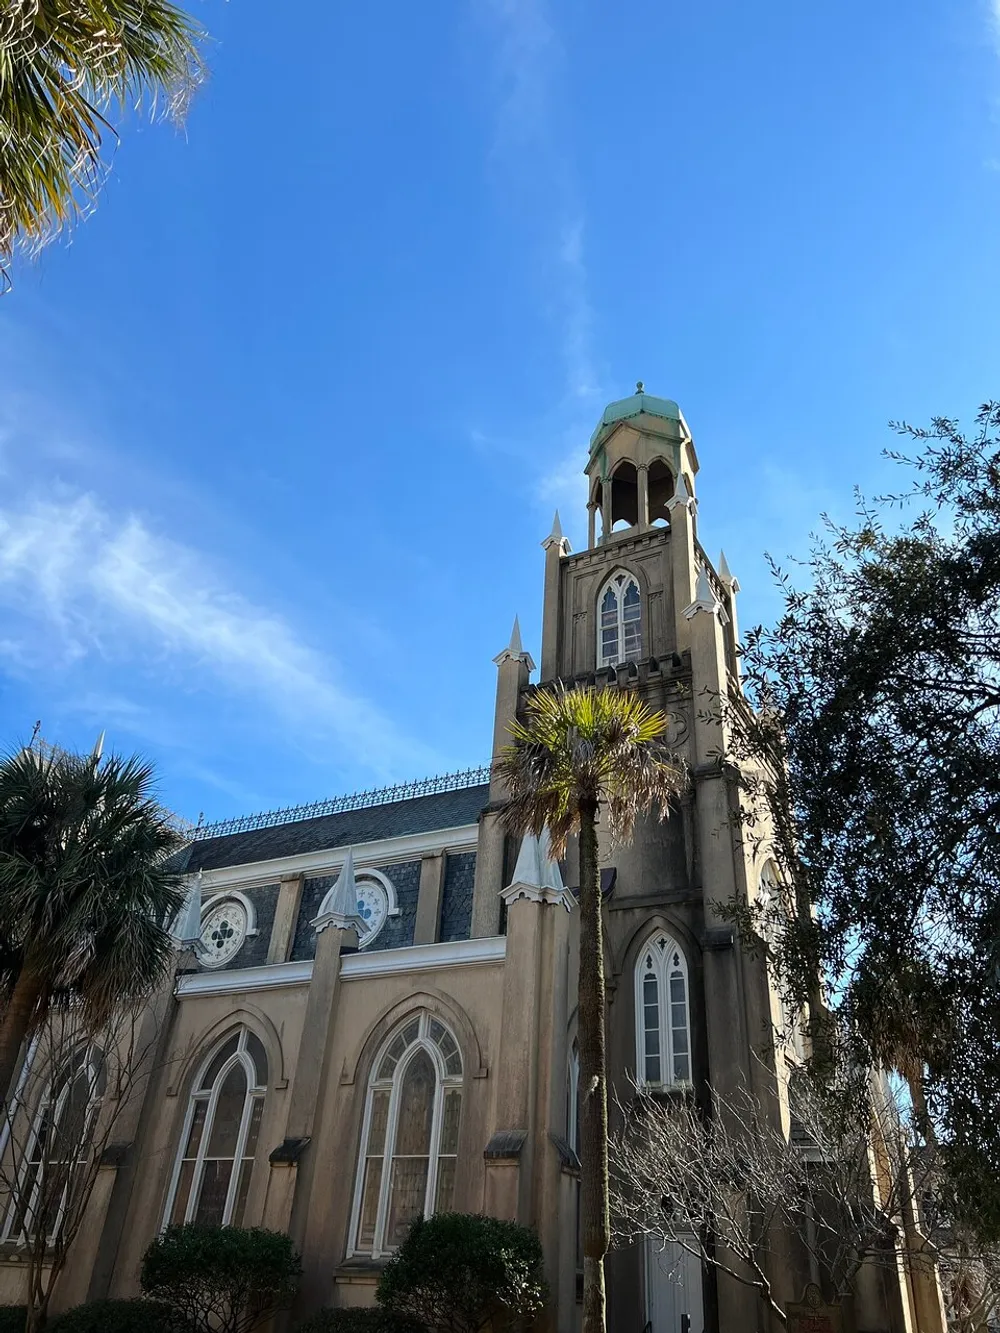 The image shows a tall historic-looking church with gothic architectural elements framed by palm trees against a clear blue sky